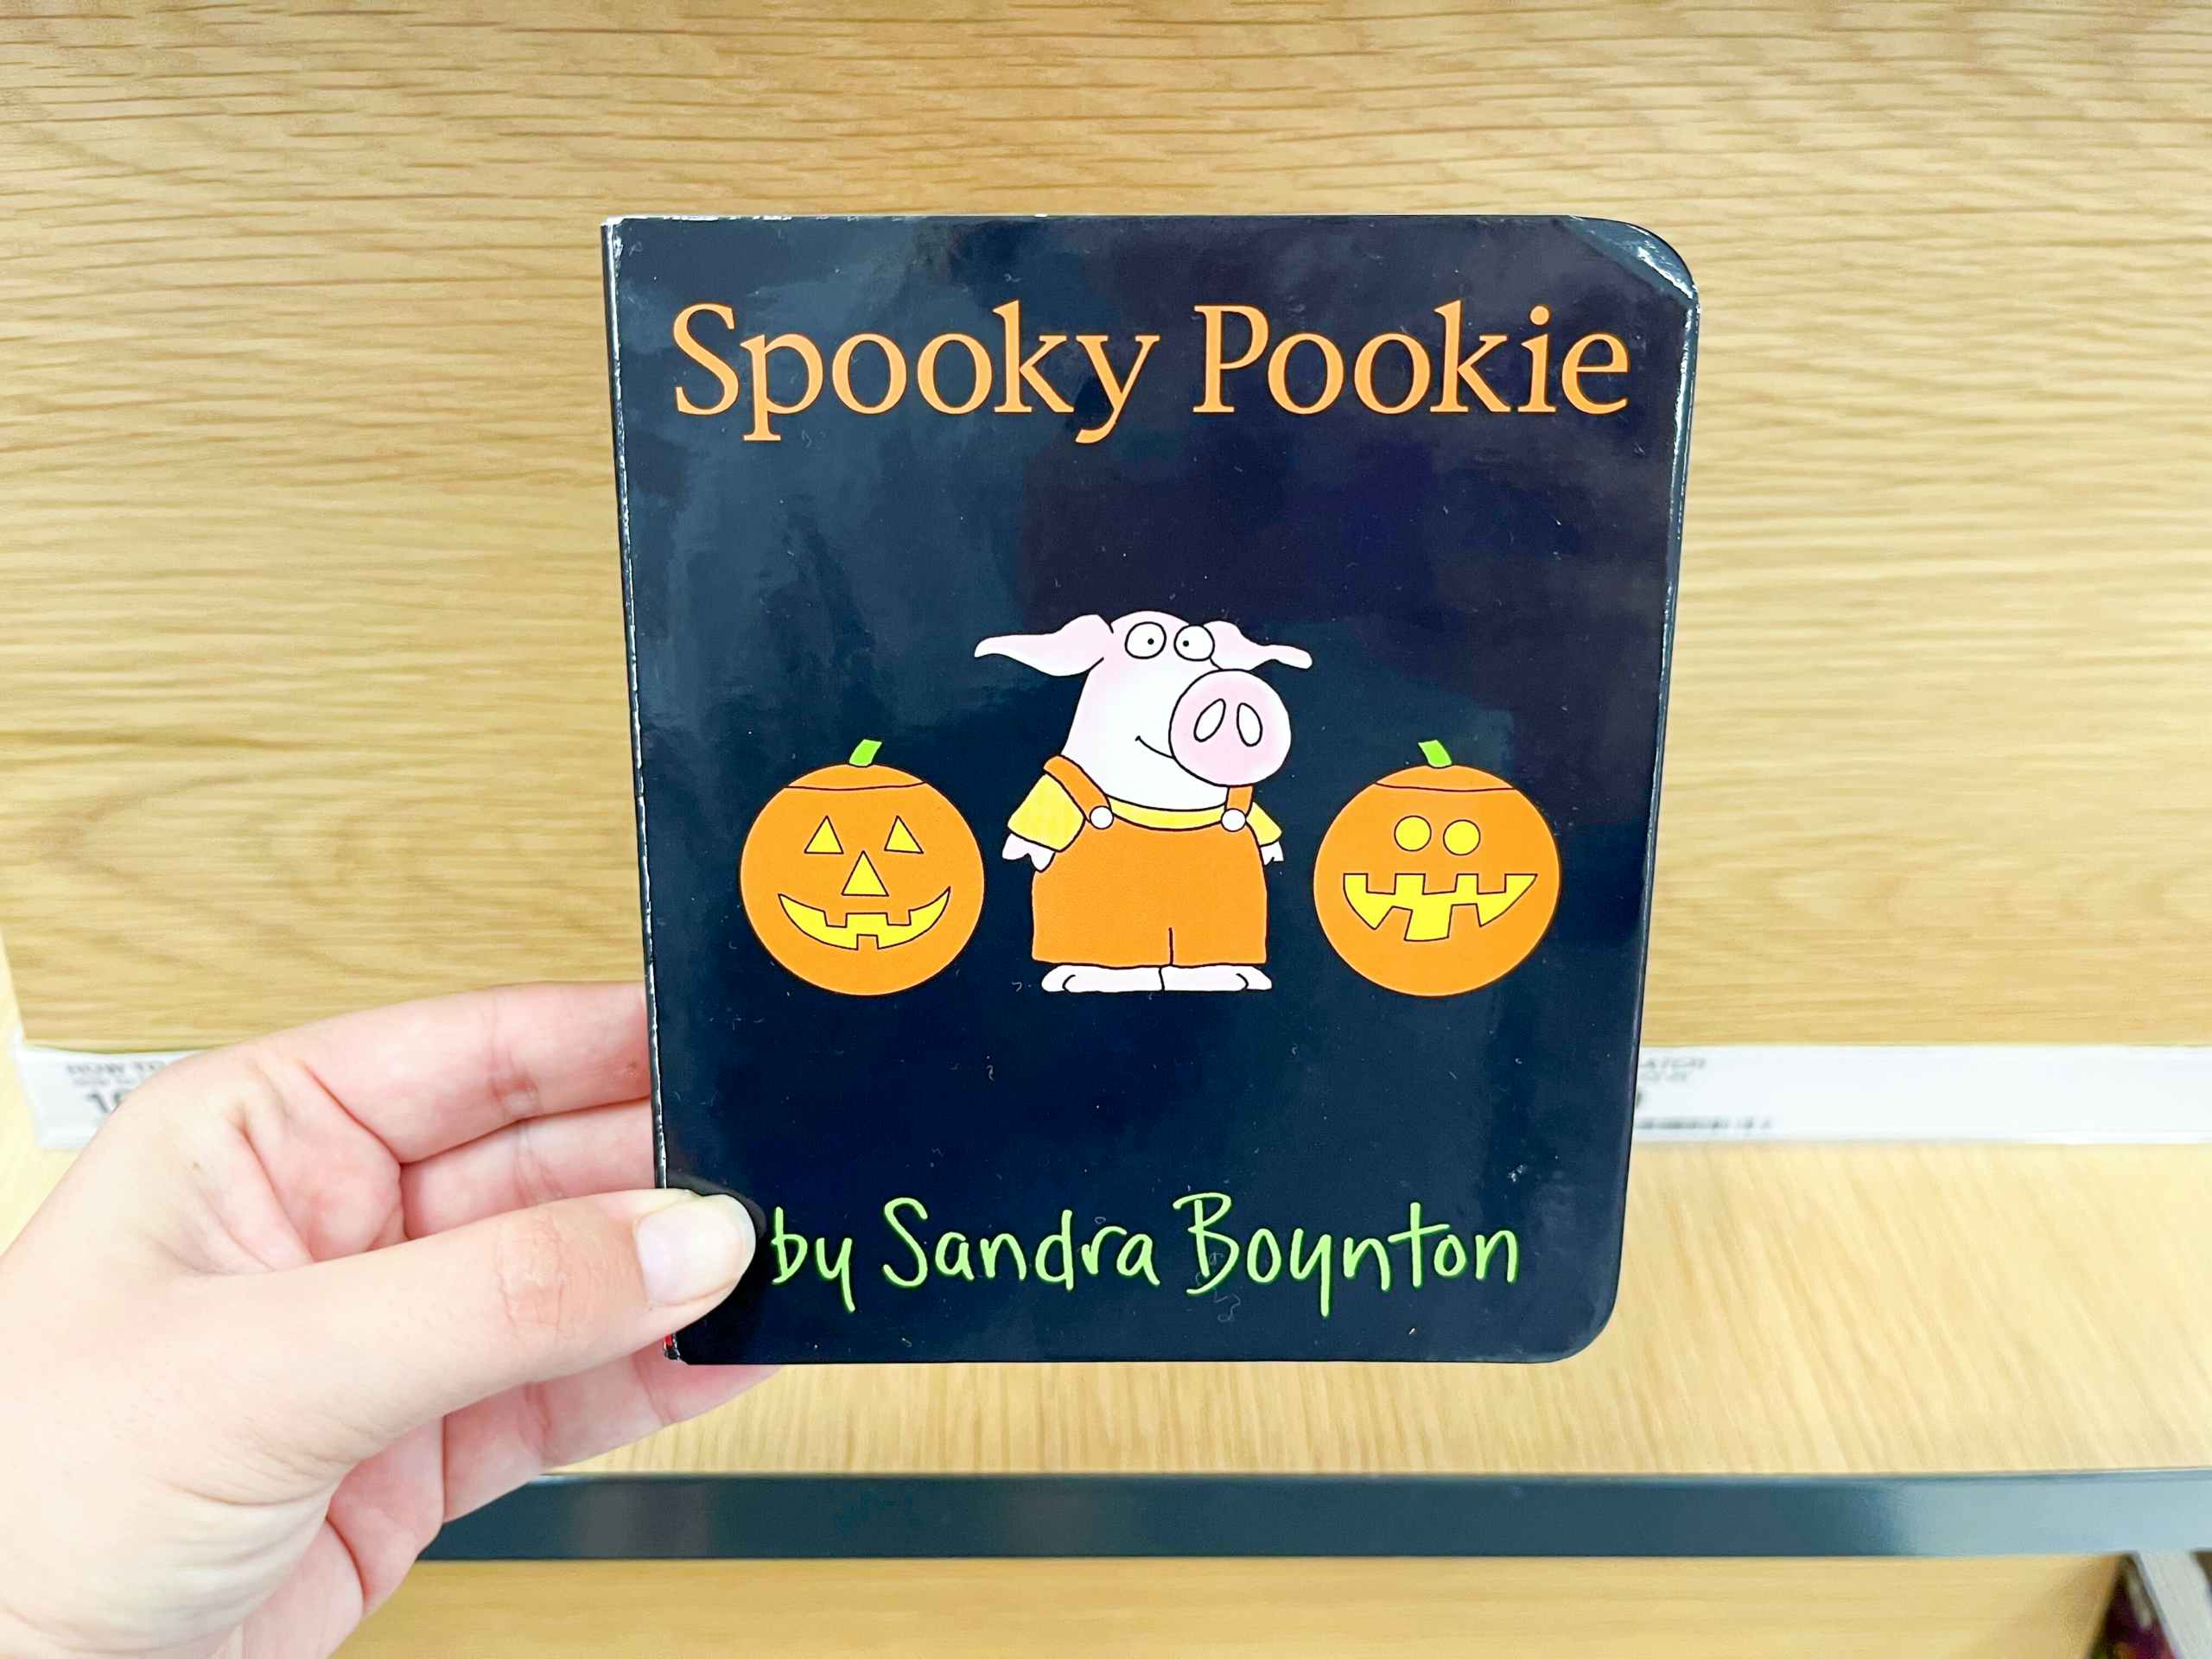 hand holding spooky pookie book